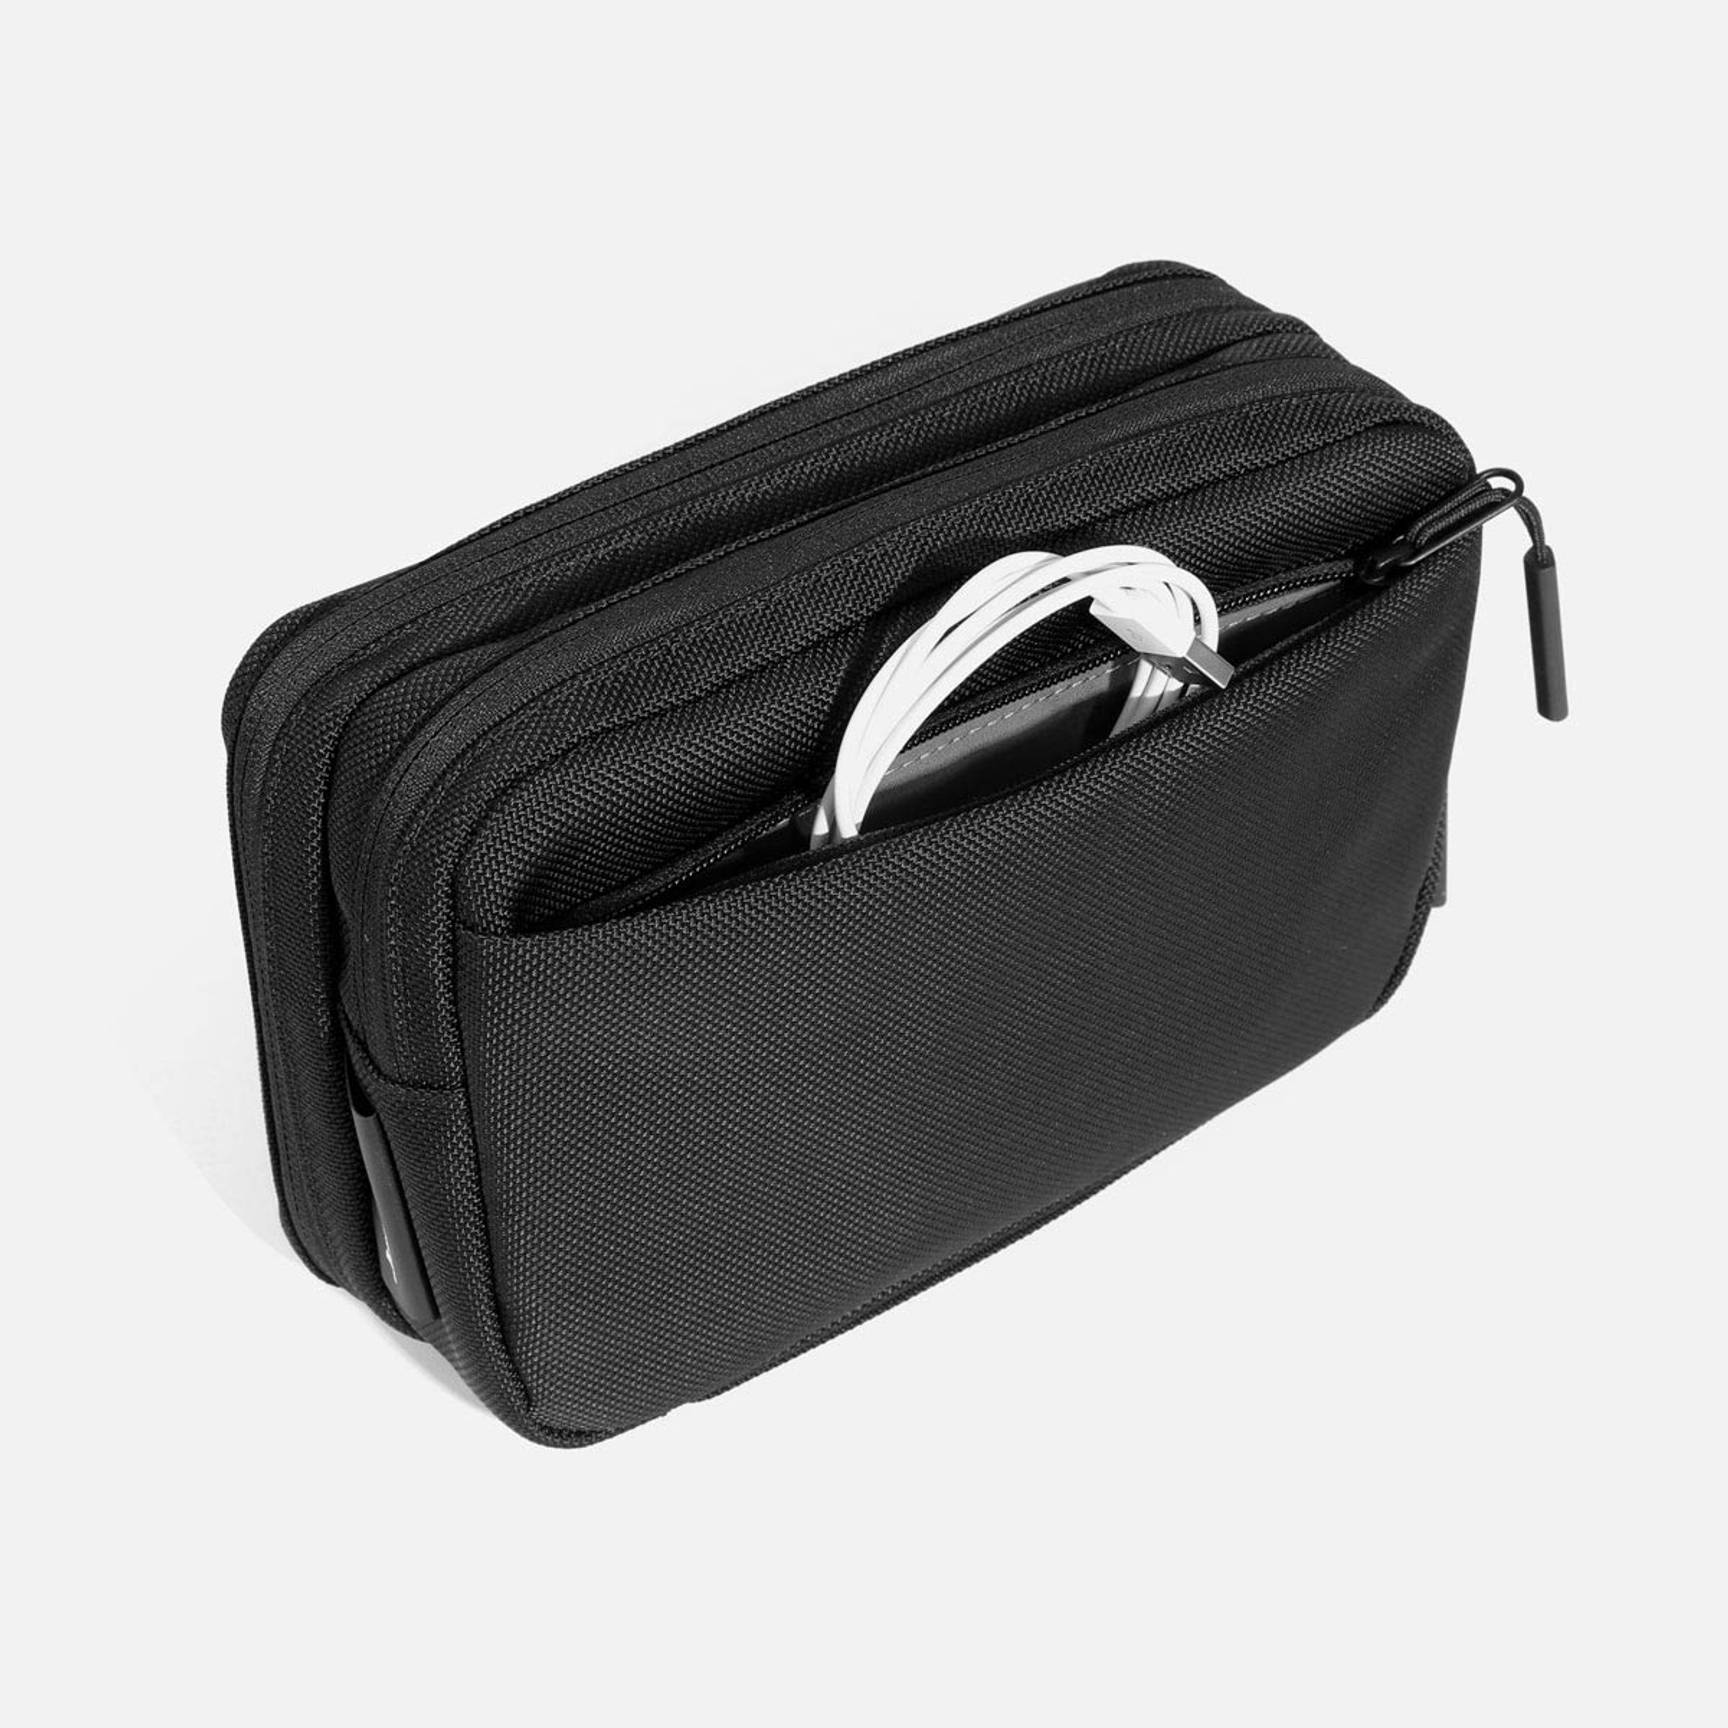 Set of 2 Purse Organizers with the Basic Slim Style for Louis